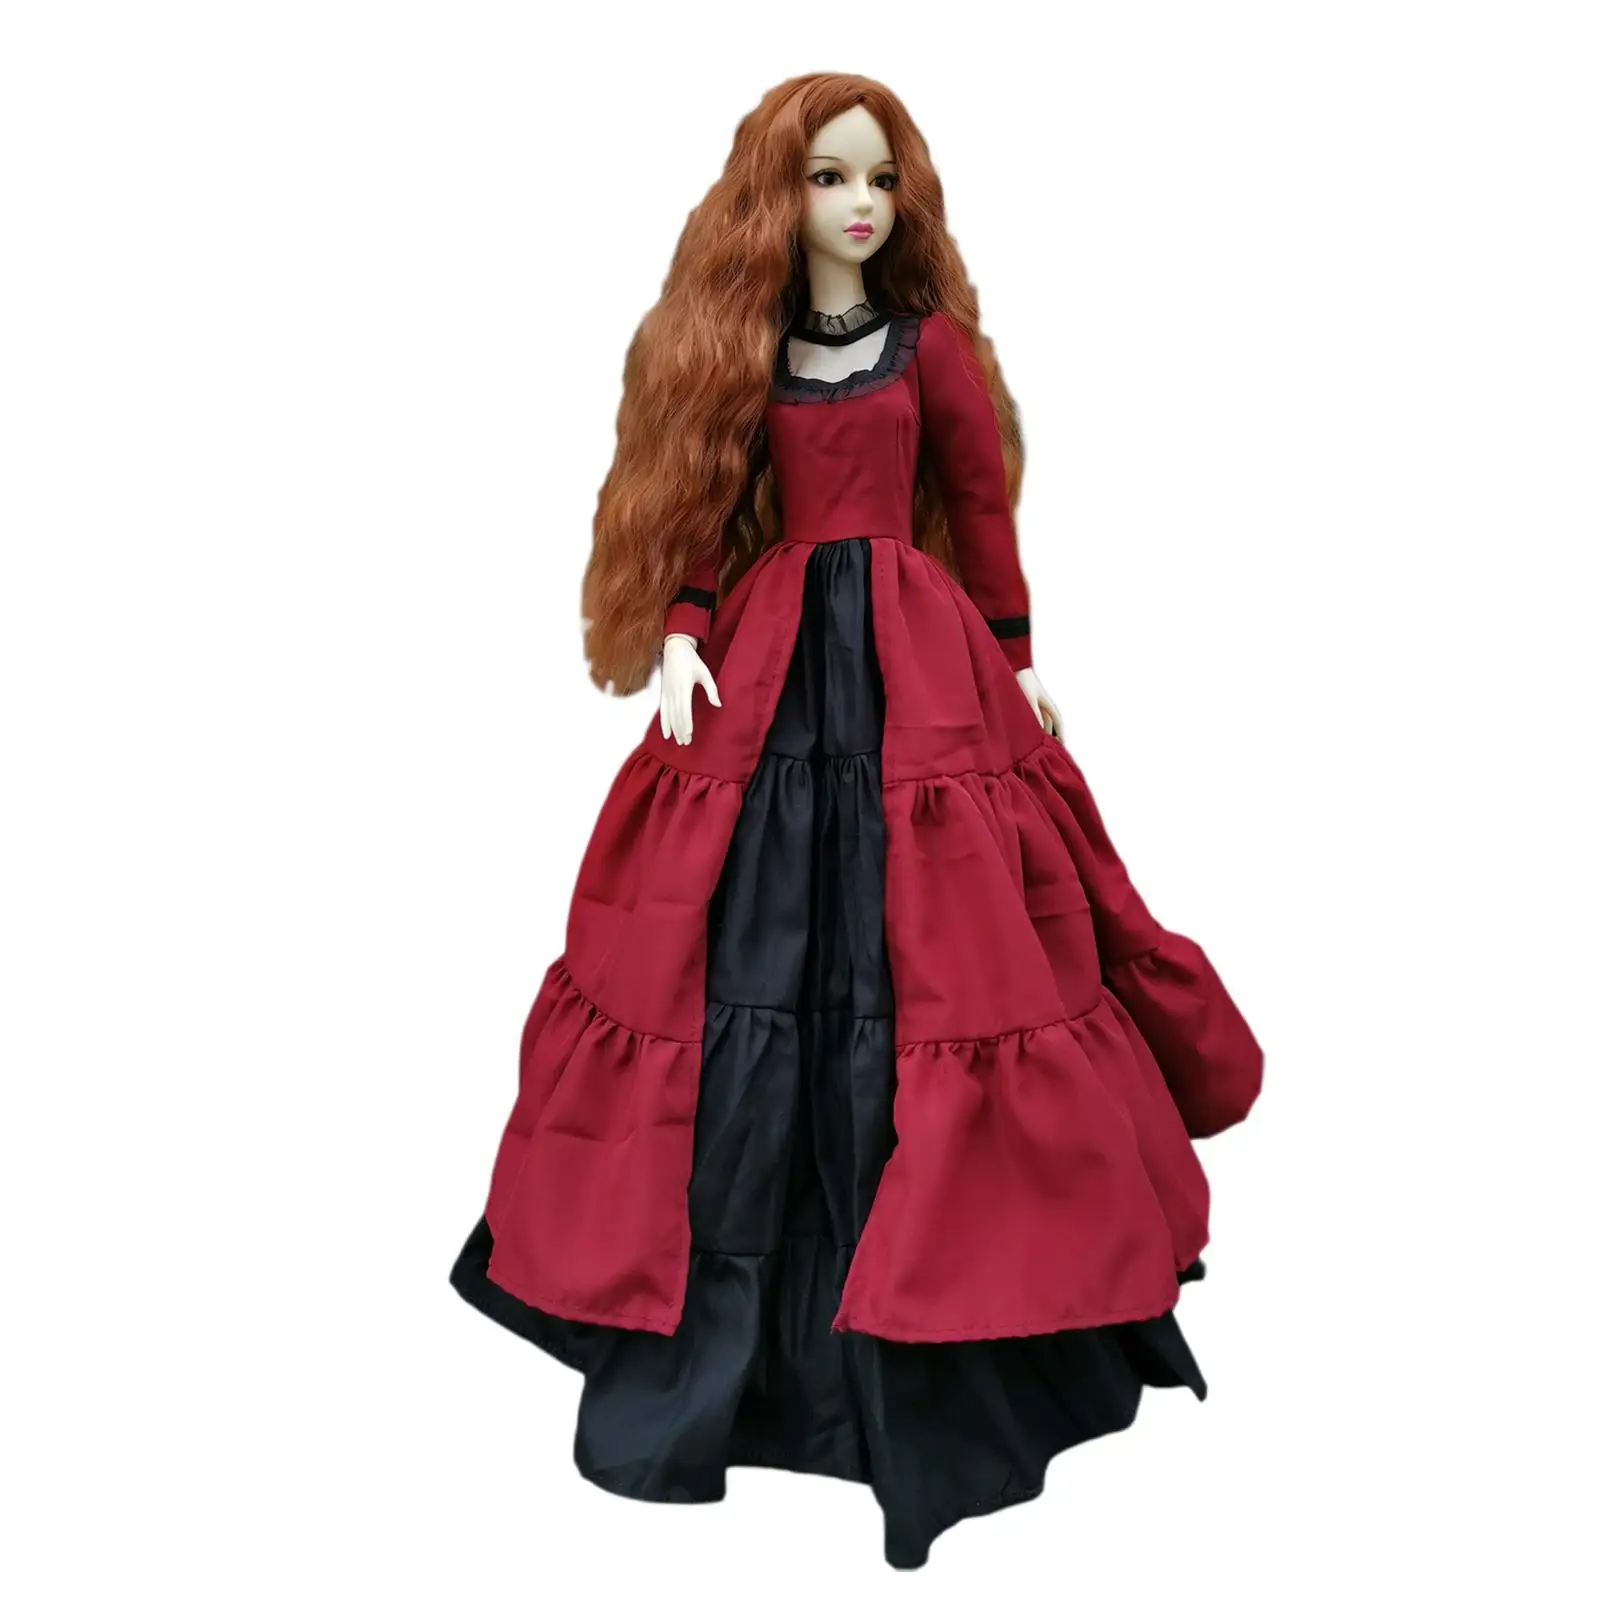 Ball Jointed Doll 1/3 Dolls Rotatable Joints Princess Doll 24 inch Doll Action Figures for Thanksgiving Girls